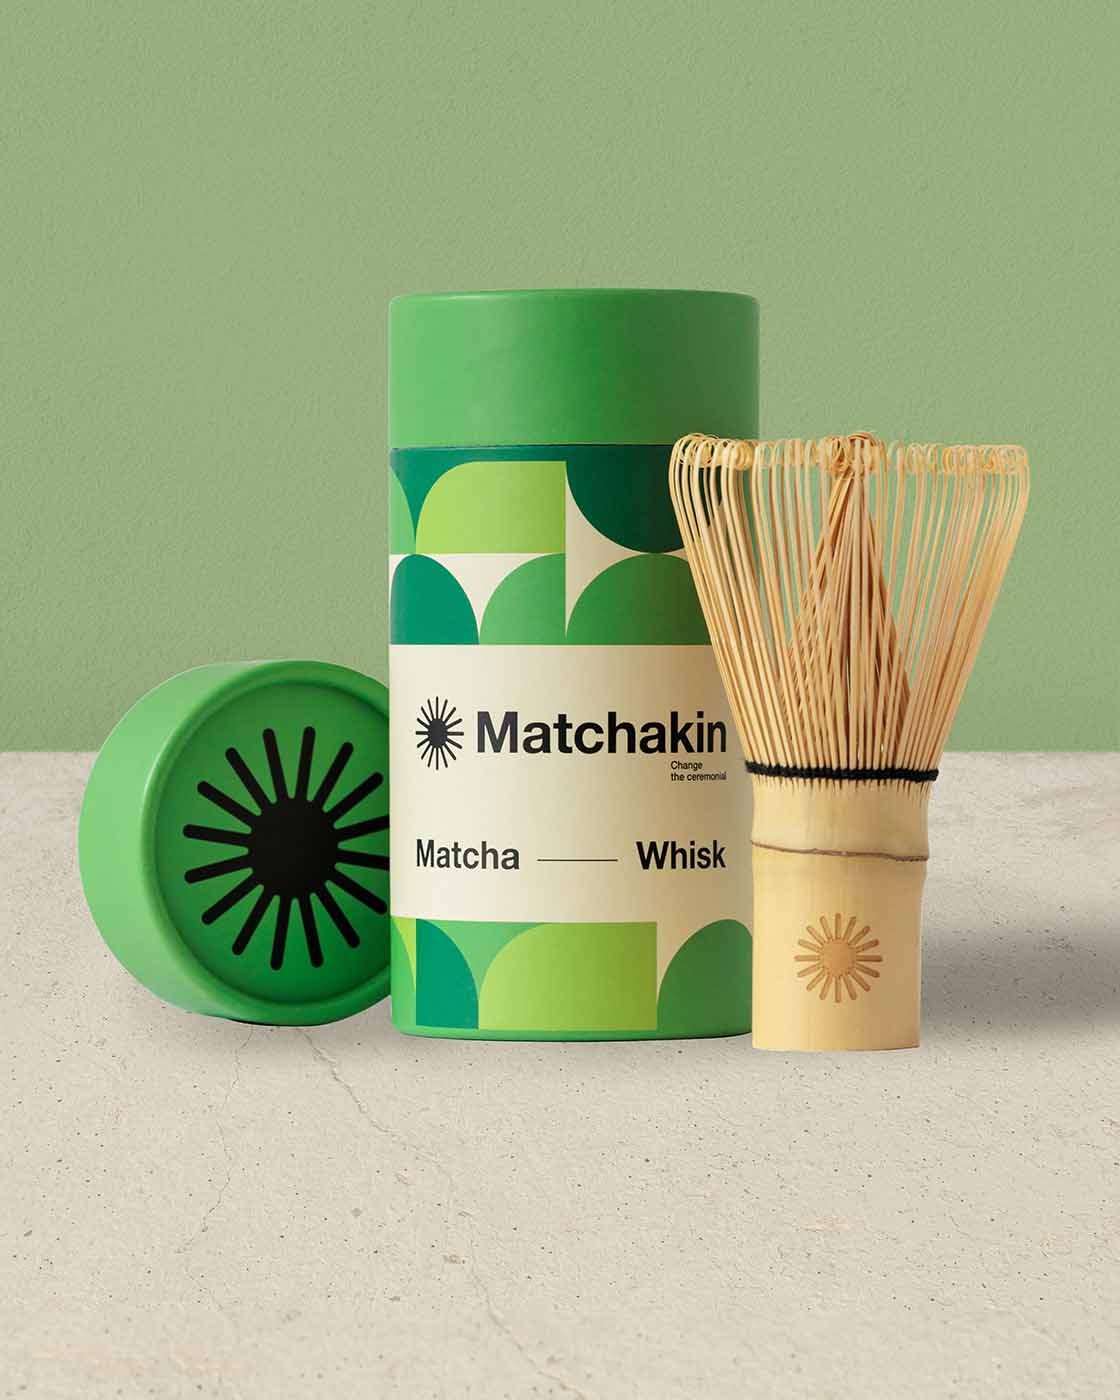 Original Chasen bamboo whisk with 100 prongs for preparing matcha. Logo Matchakin engraved and eco sustainable package